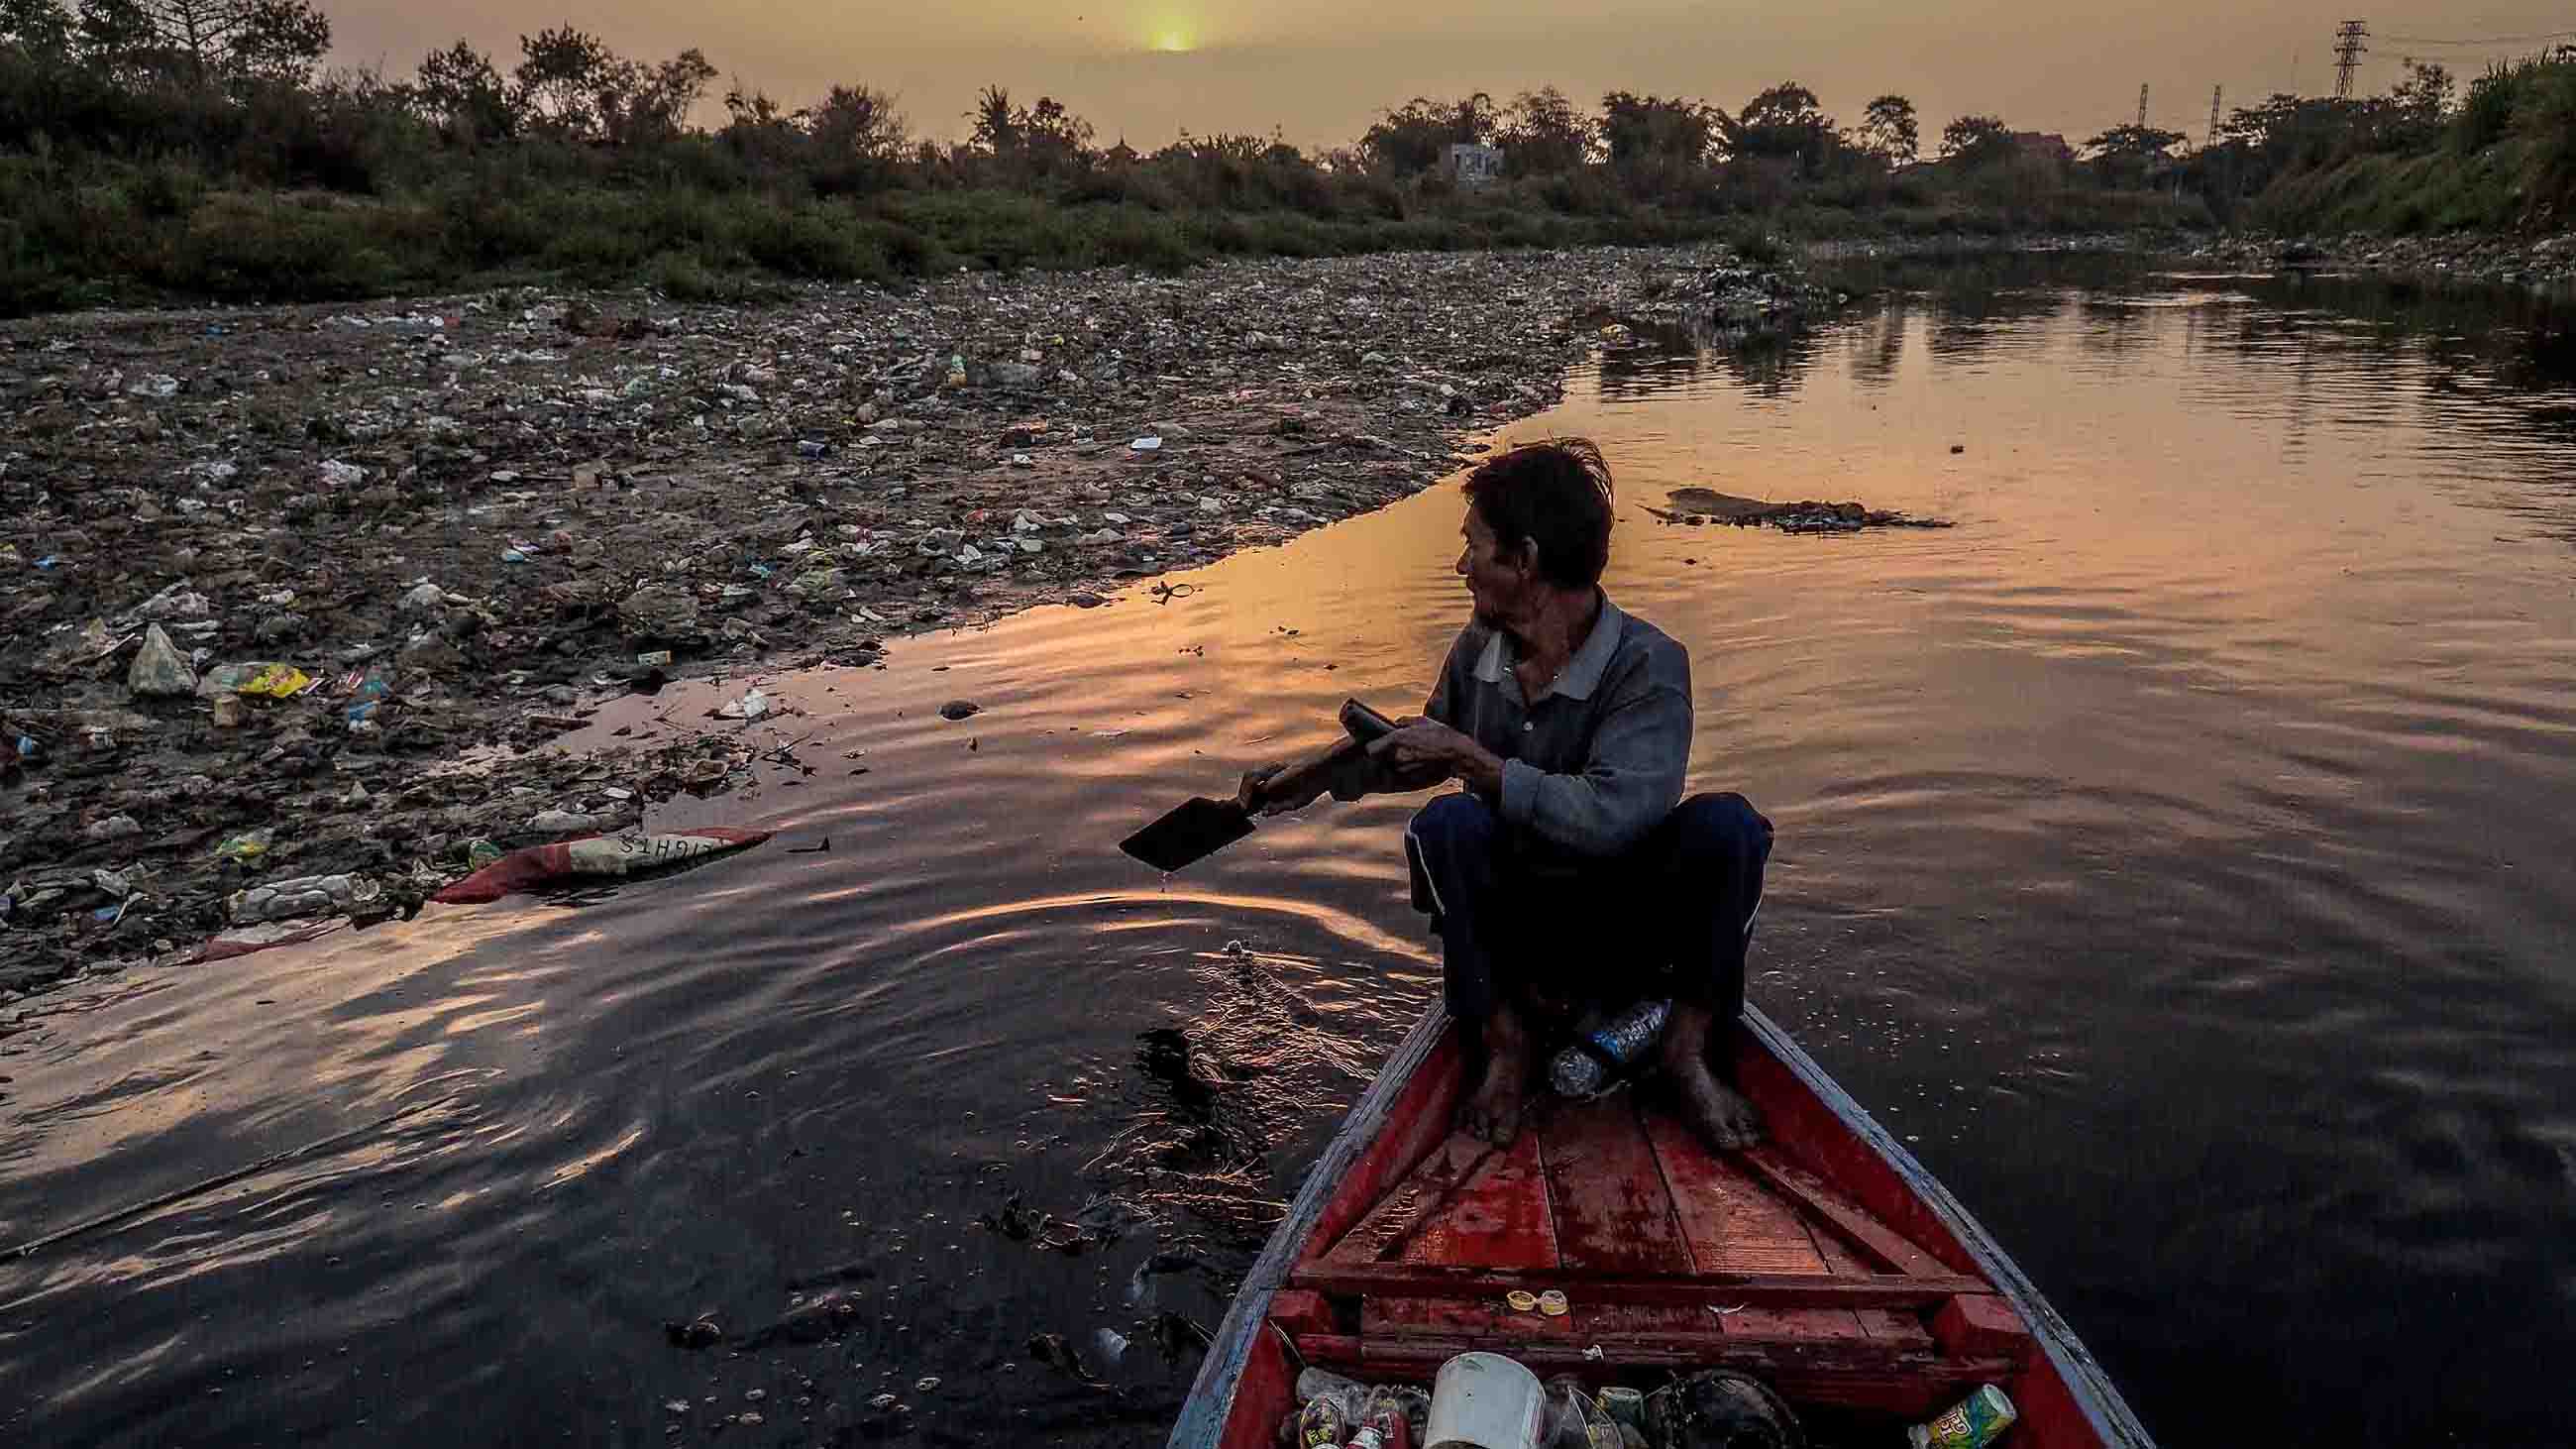 Dedi Rahman, 65, remembers swimming in the Citarum River when he was a boy. Today, the river is considered one of the world's most polluted waterways, contaminated by factory effluent, sewage and trash. Rahman gathers cans and bottles to recycle for cash.